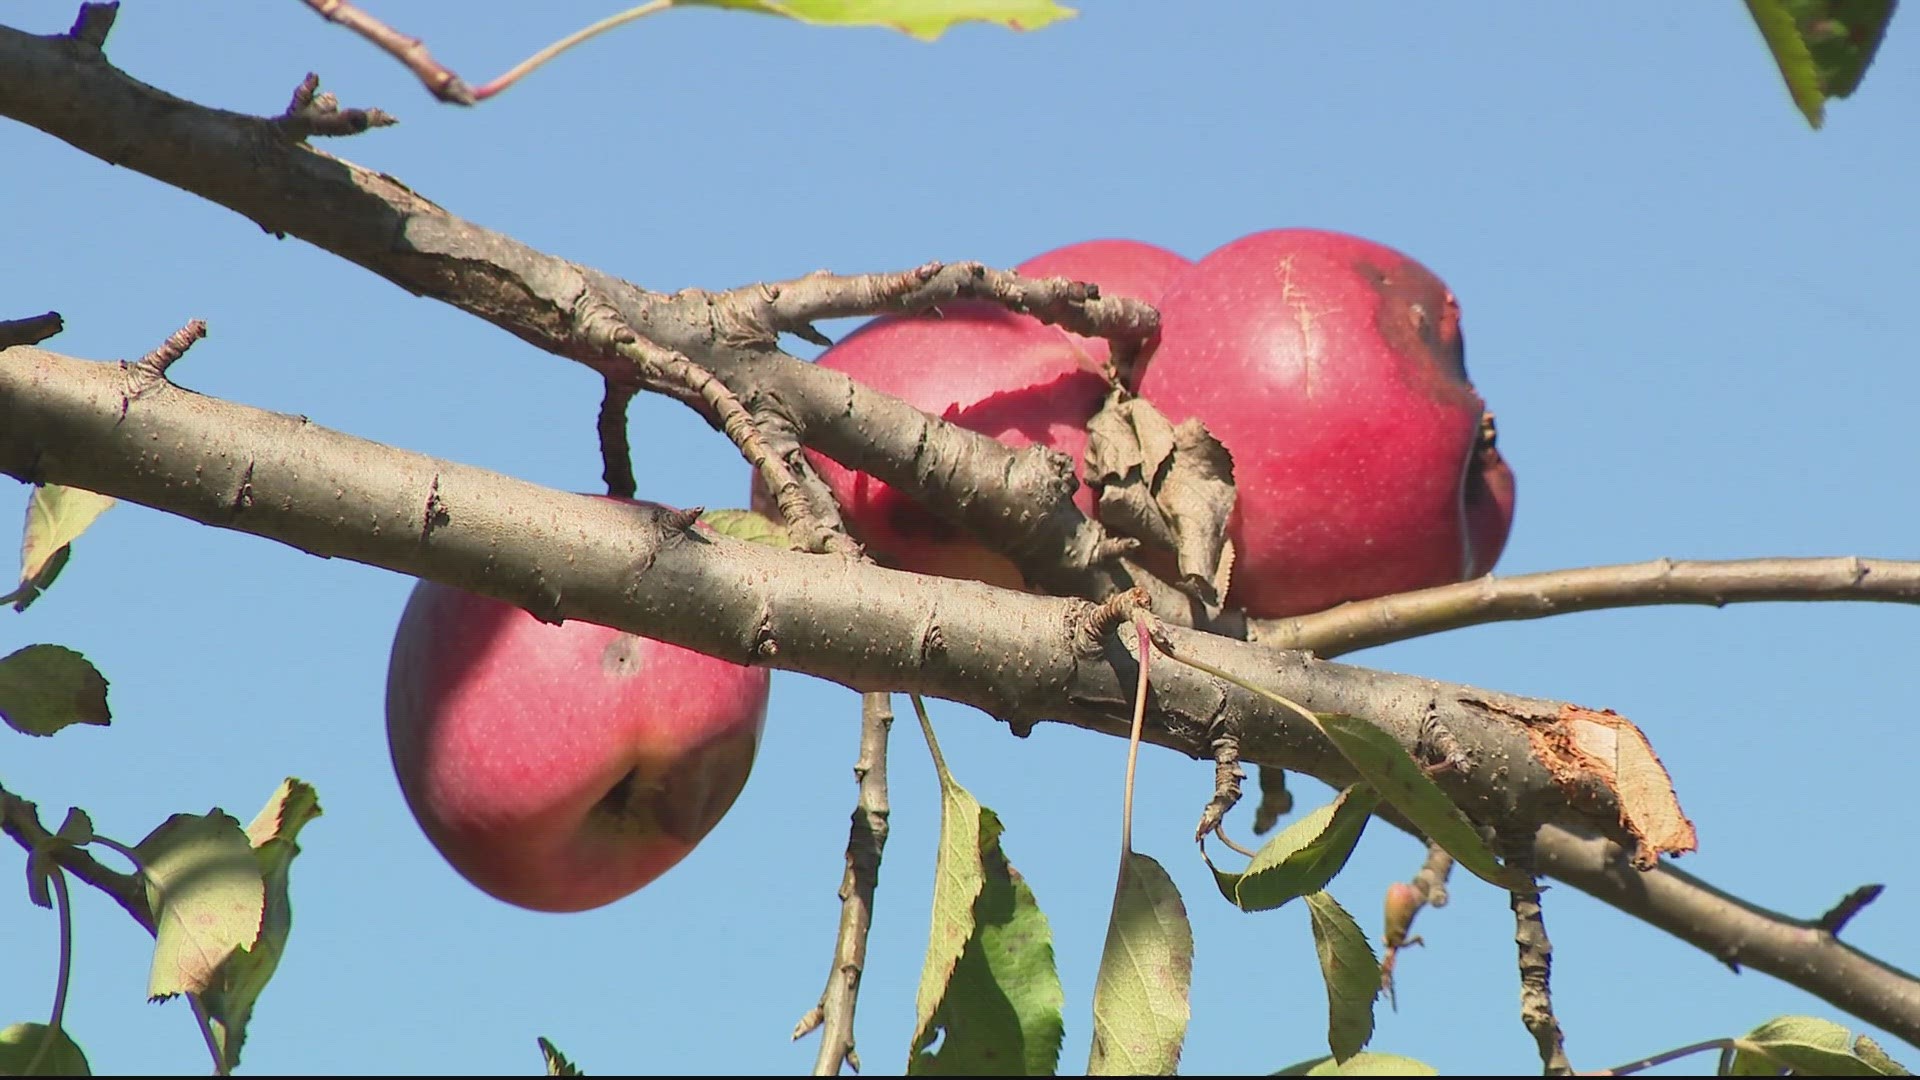 Apple maturity in Montana - Western Agricultural Research Center